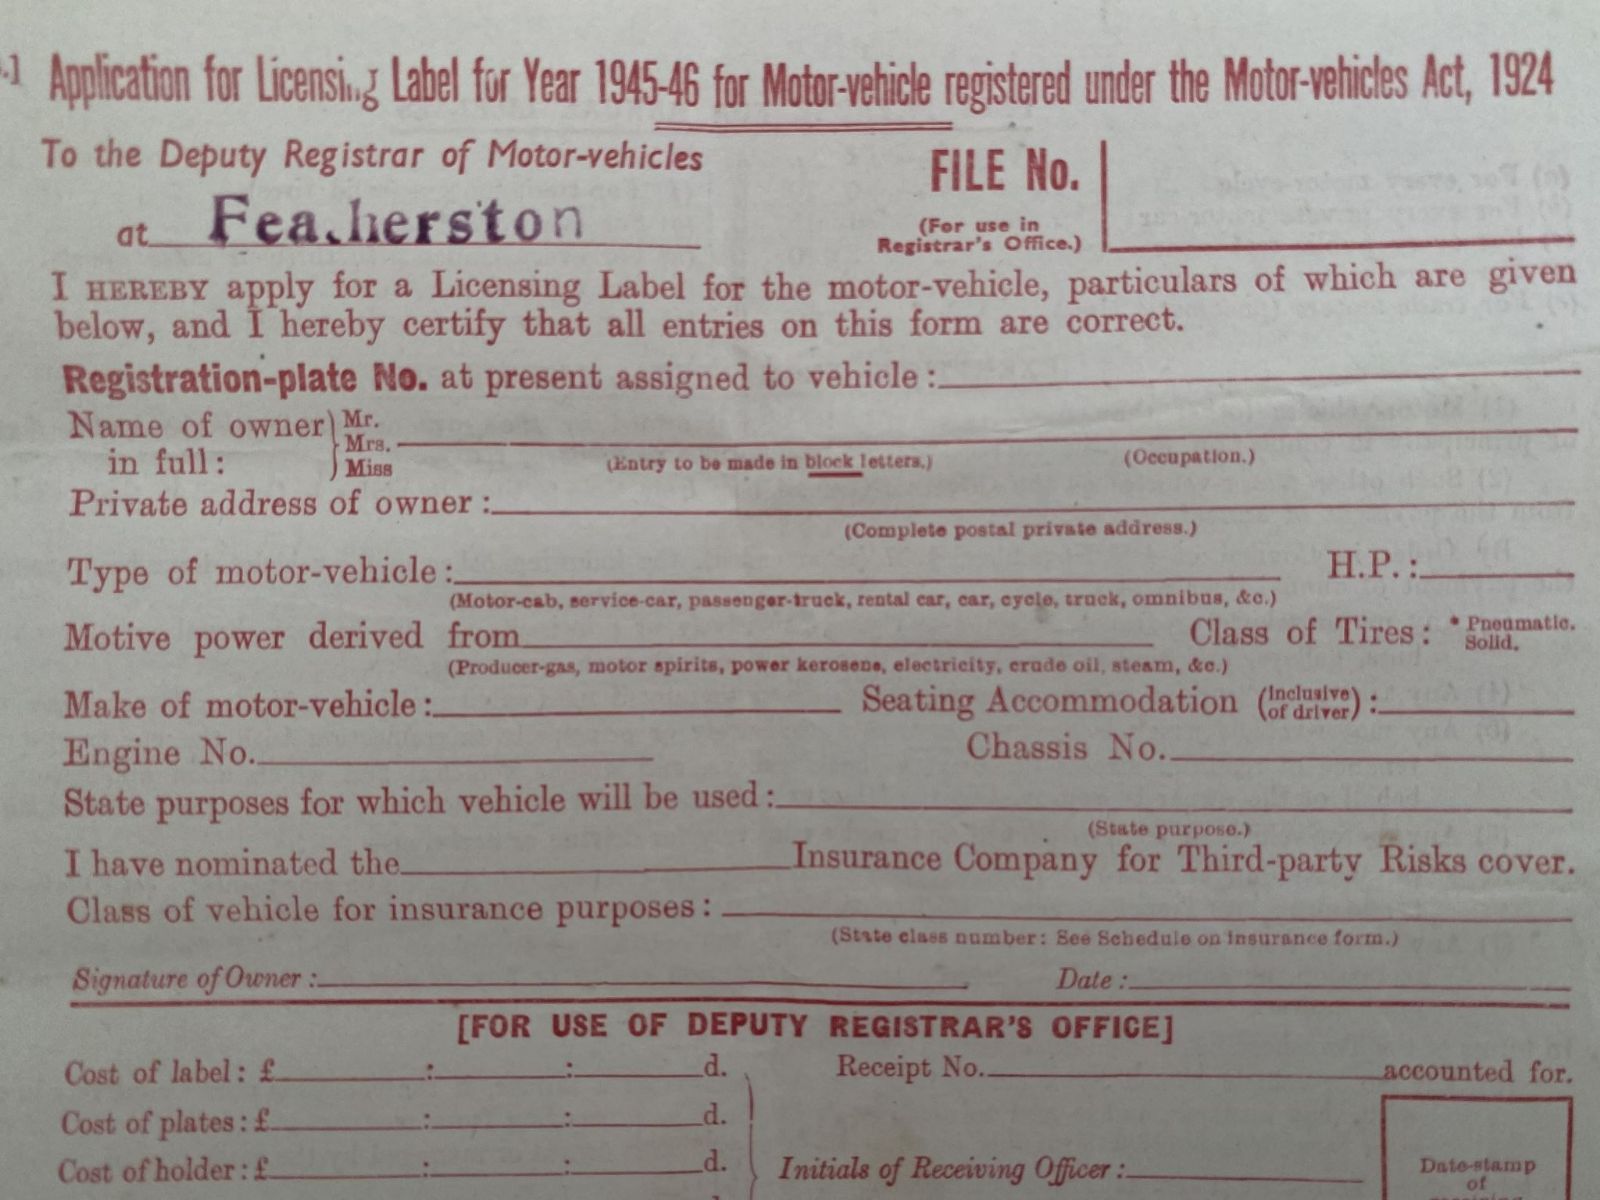 OLD DOCUMENT: Application to register Motor Vehicle 1945-46